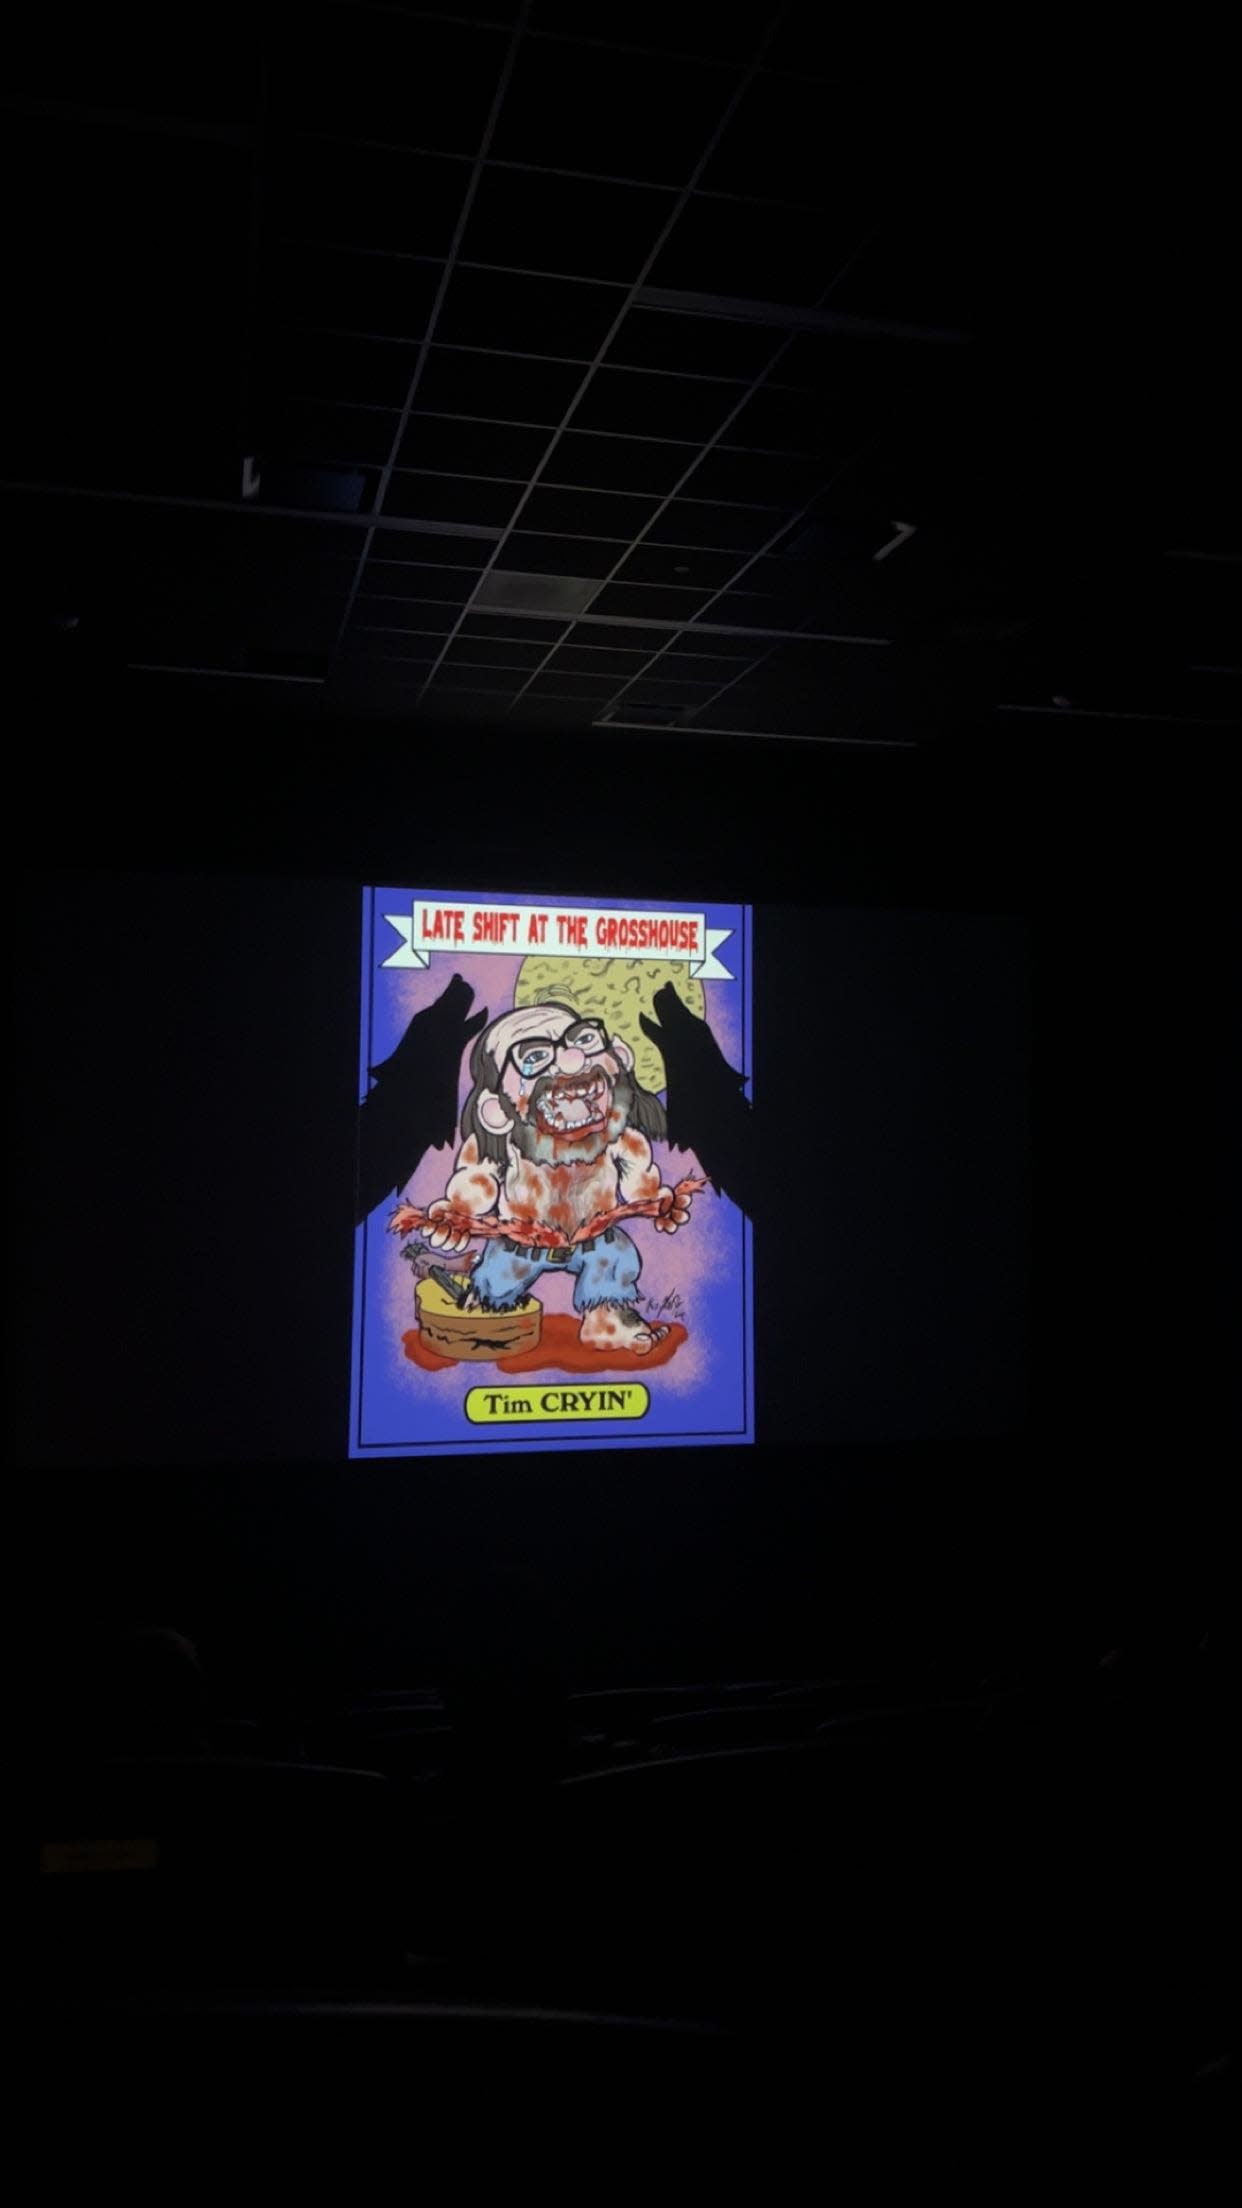 A snap of what might play during the preshow includes a graphic advertising "Late Shift at the Grindhouse" inspired by other themes and characters in Grindhouse cinema.